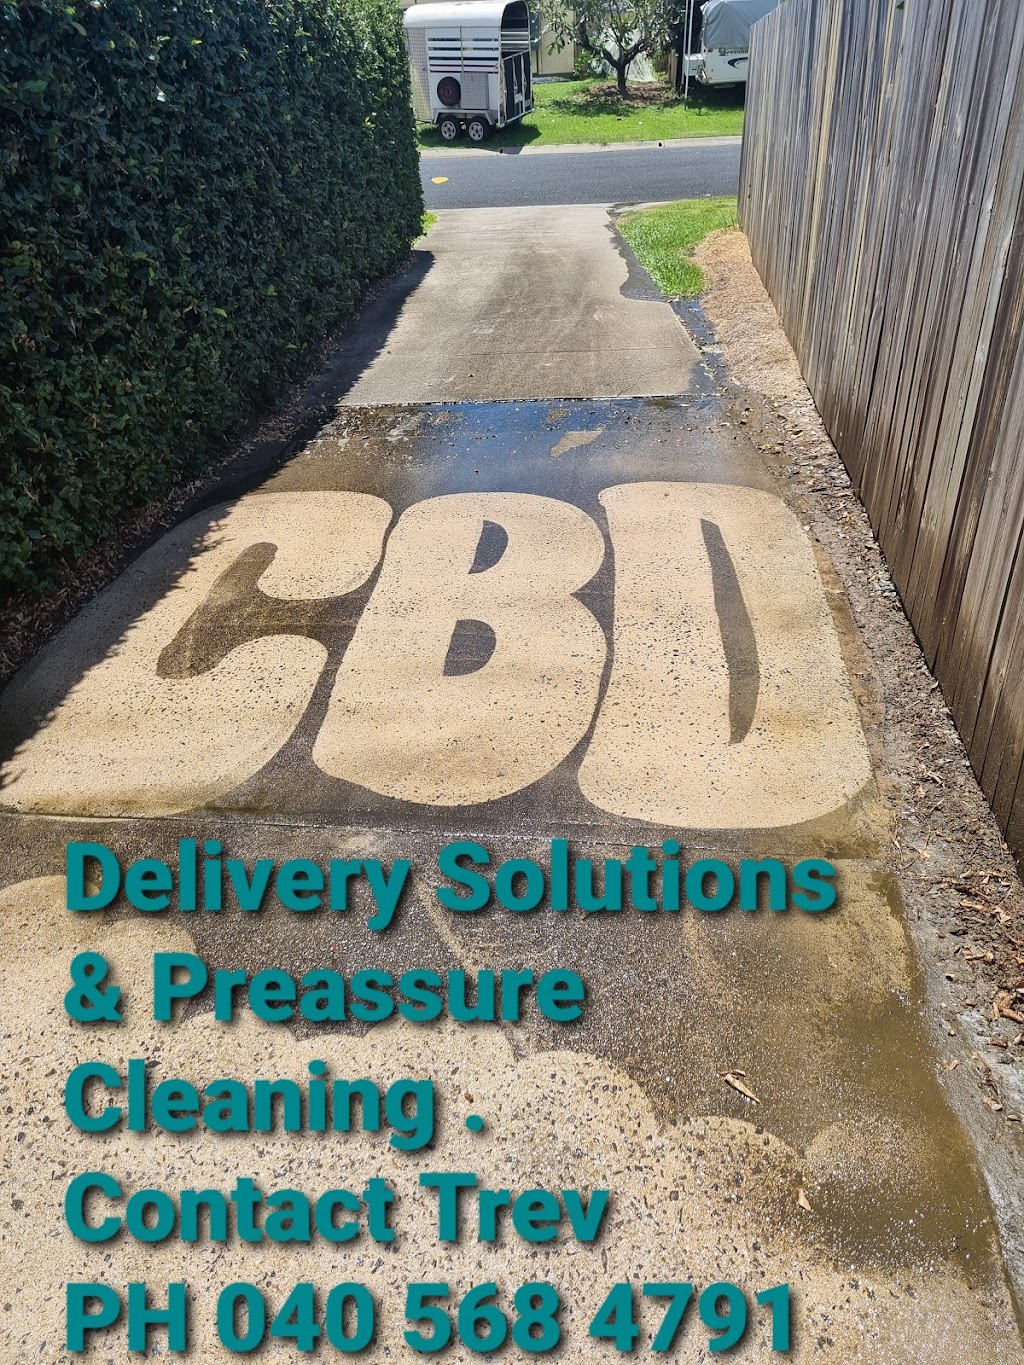 CBD DELIVERY SOLUTIONS AND PREASSURE SERVICES | 29 McBride St, Redlynch QLD 4870, Australia | Phone: 0405 684 791